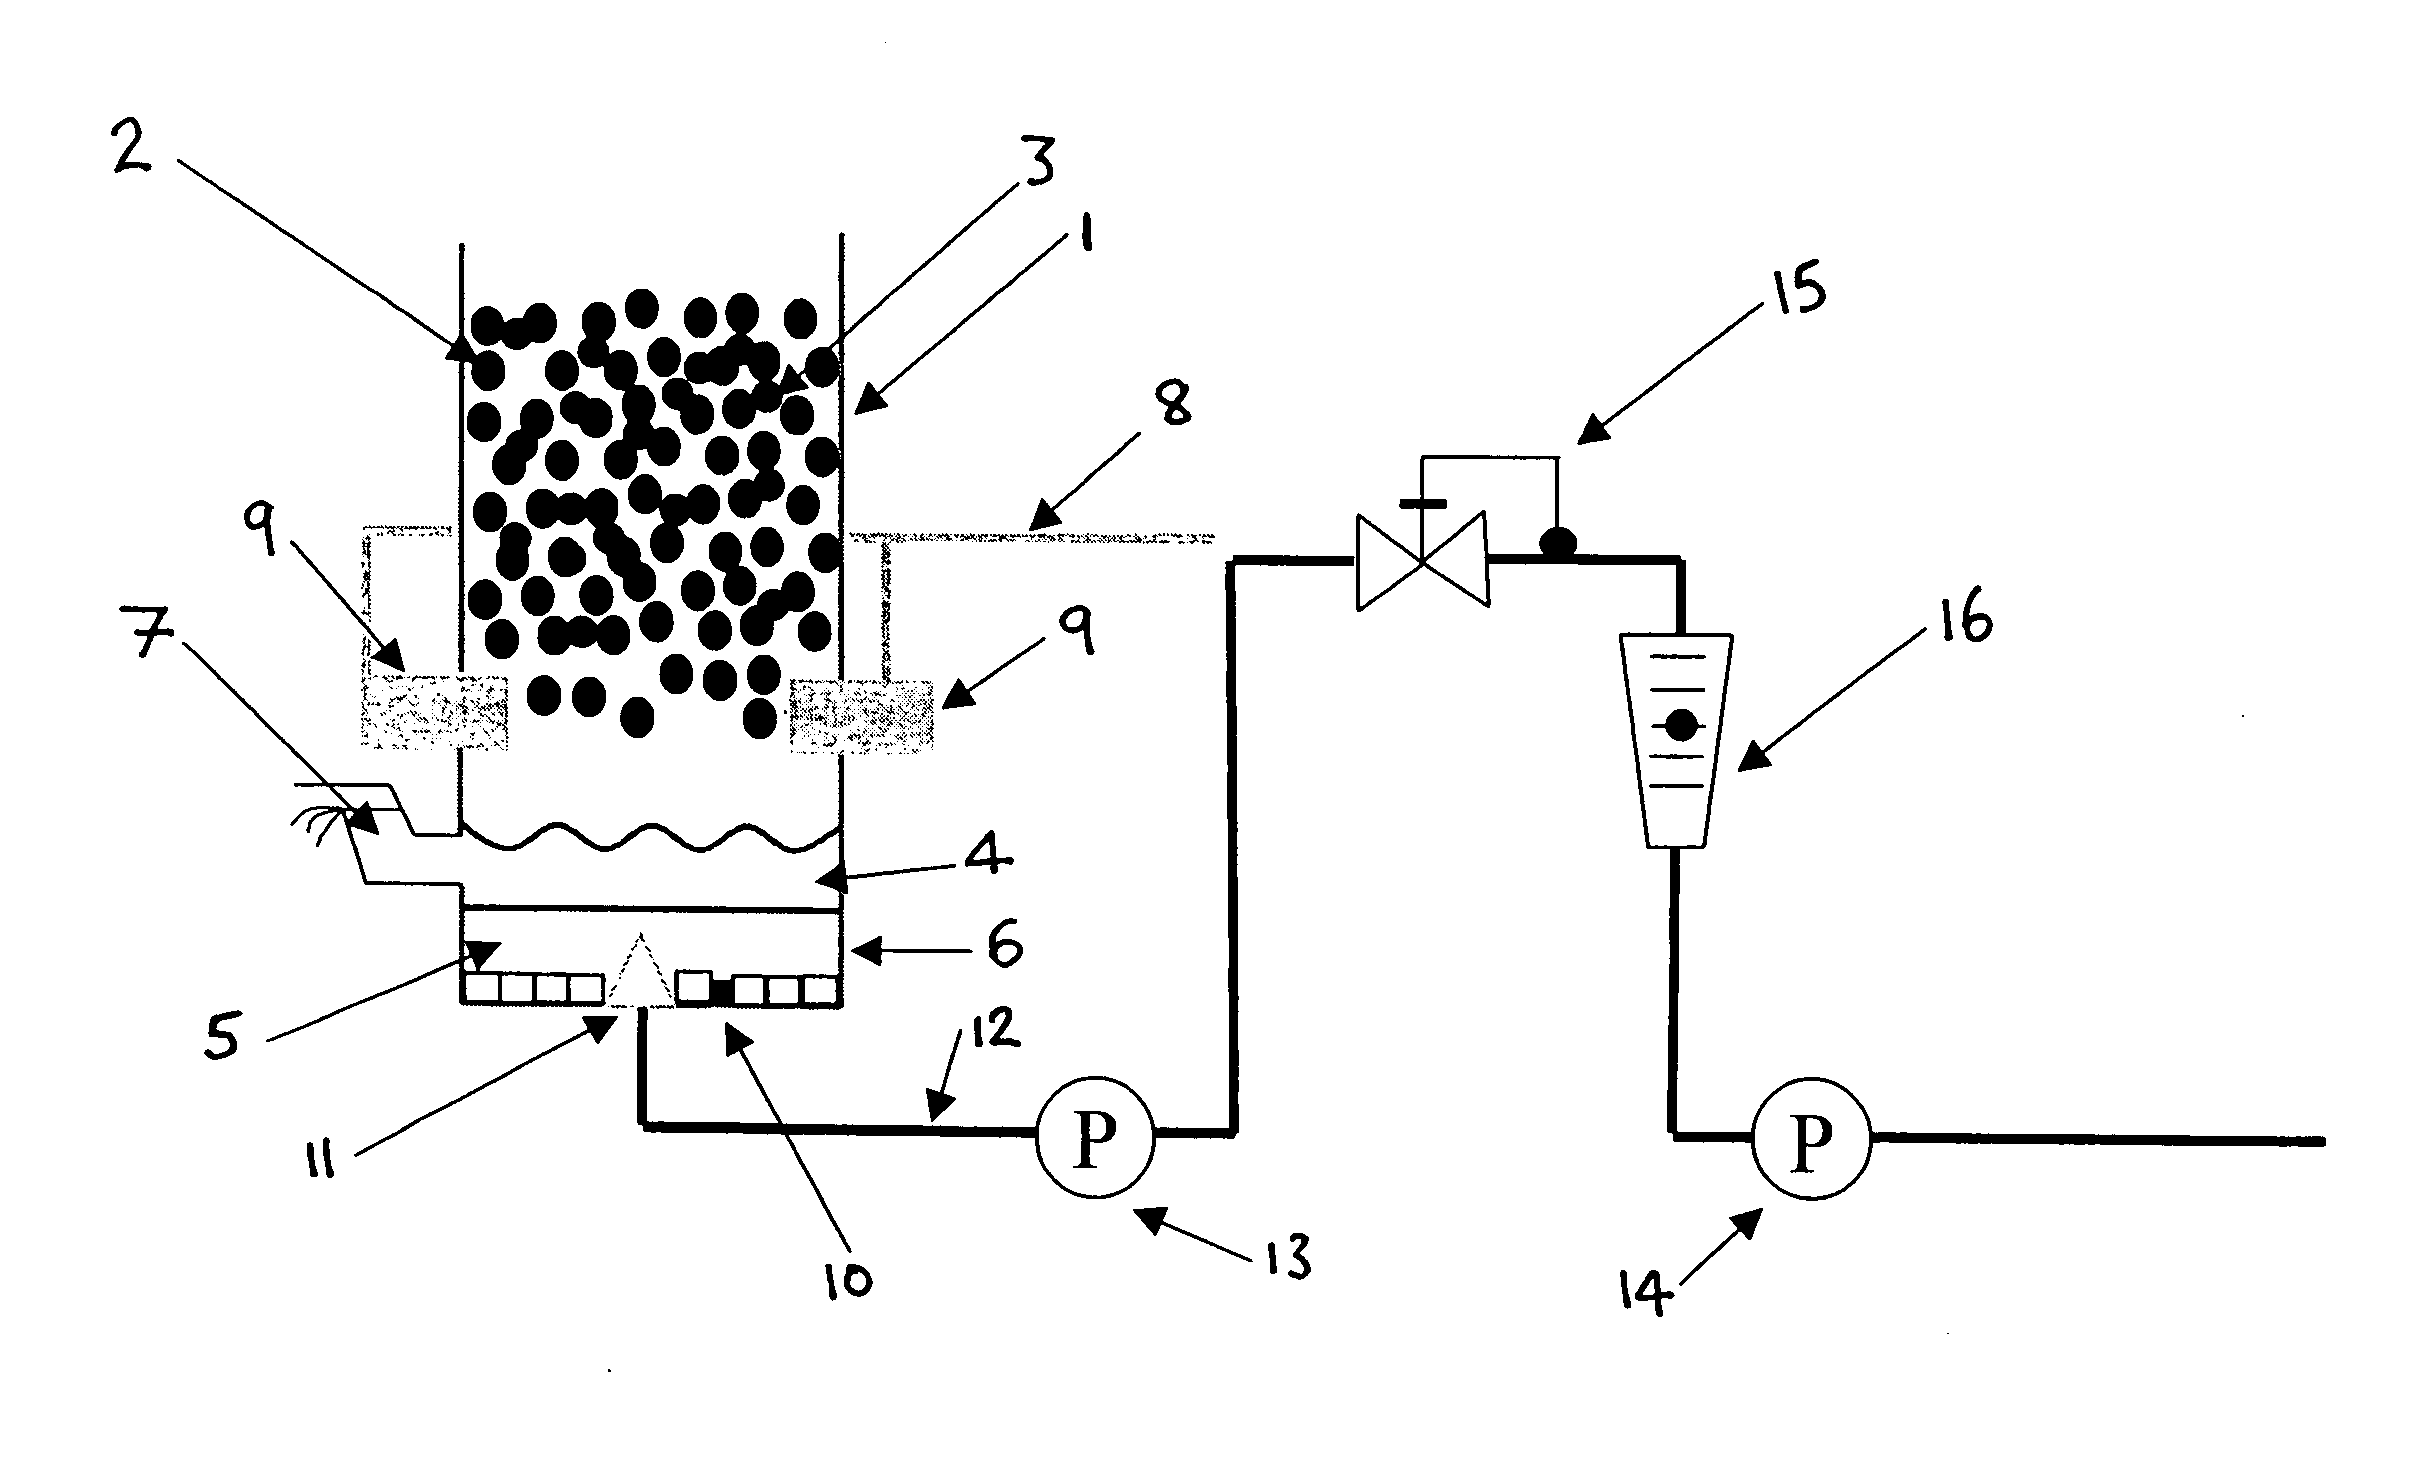 Production of mineral fibers